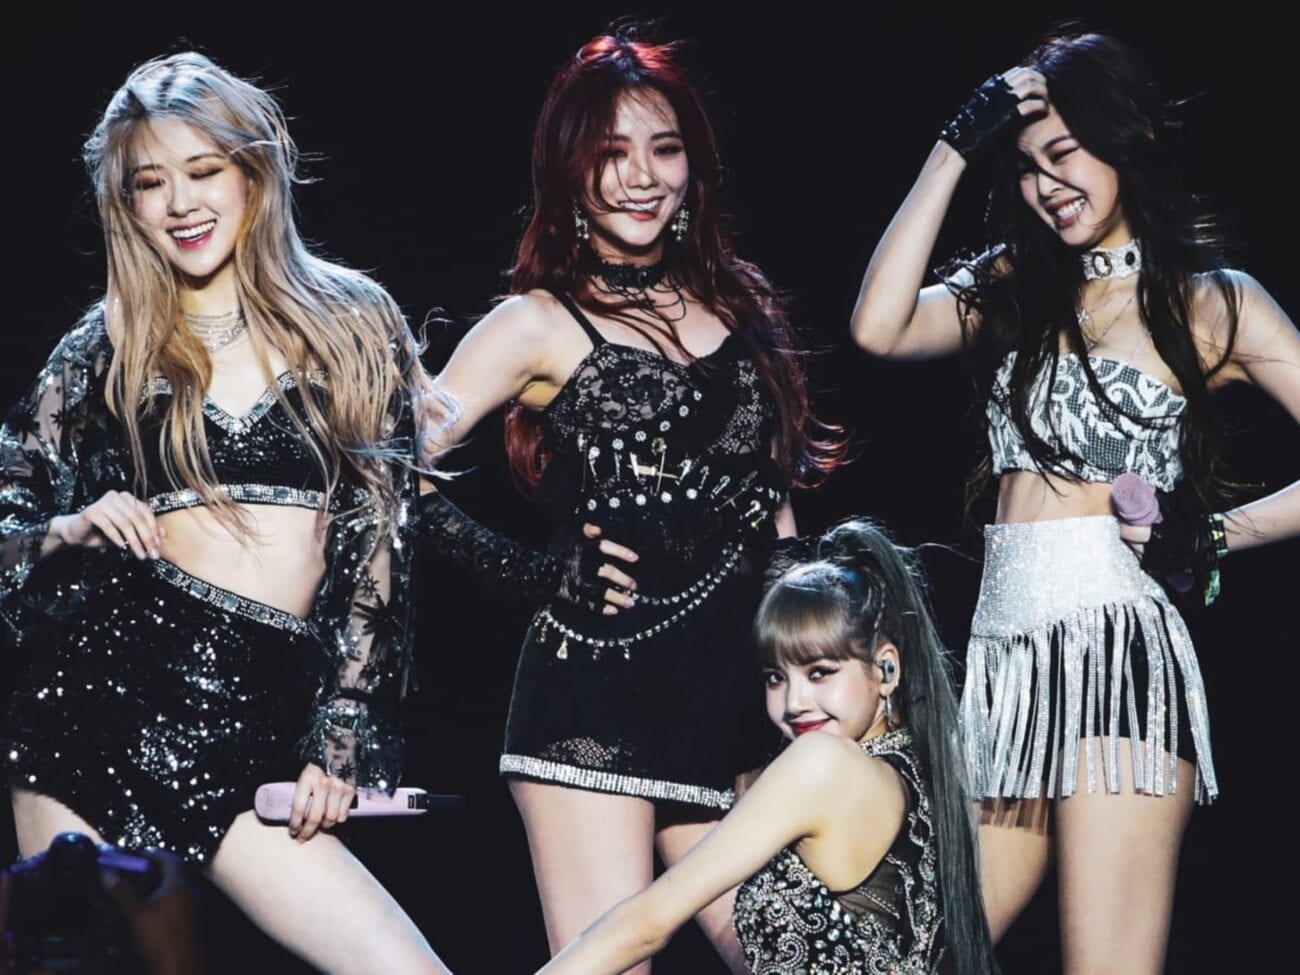 Looking for an all new K-pop obsession? Prepare to fall in love with some of the hottest female idols from Blackpink.